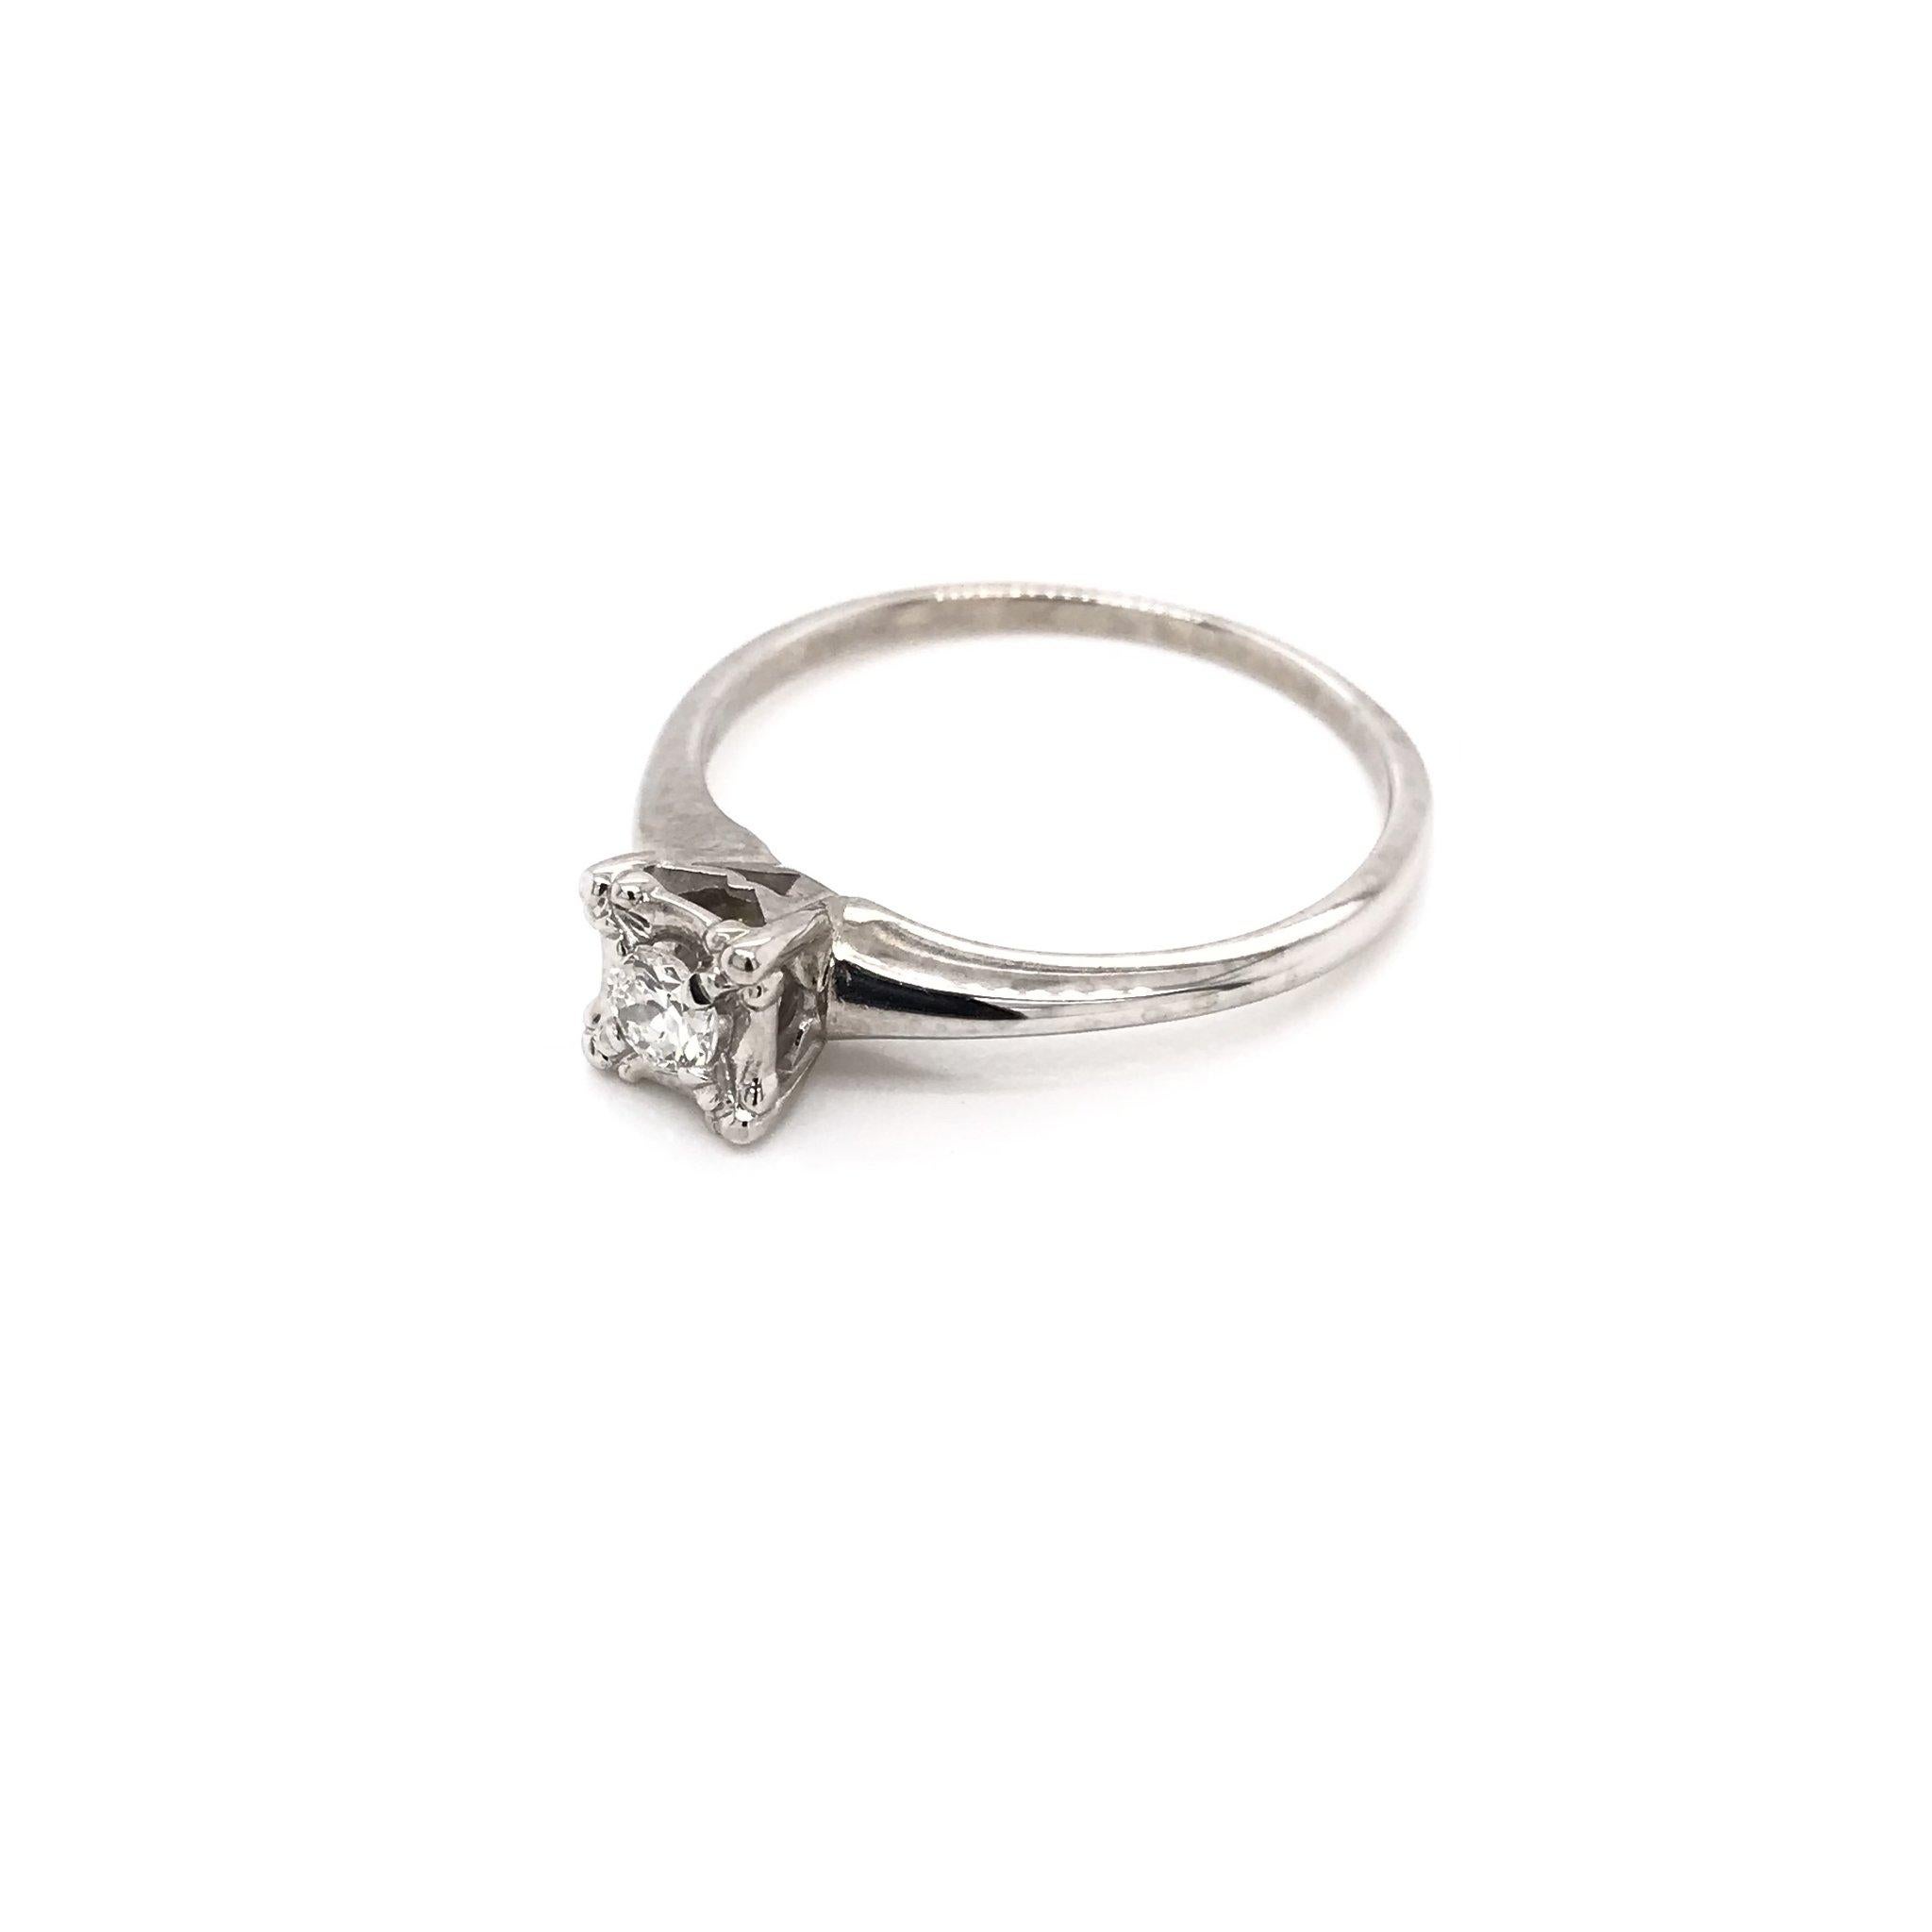 This sweet Mid Century diamond ring was crafted sometime during the Retro design period ( 1940-1960 ). The 14k white gold setting features a simple diamond solitaire style. The center diamond measures approximately 0.17 carats and grades I in color,